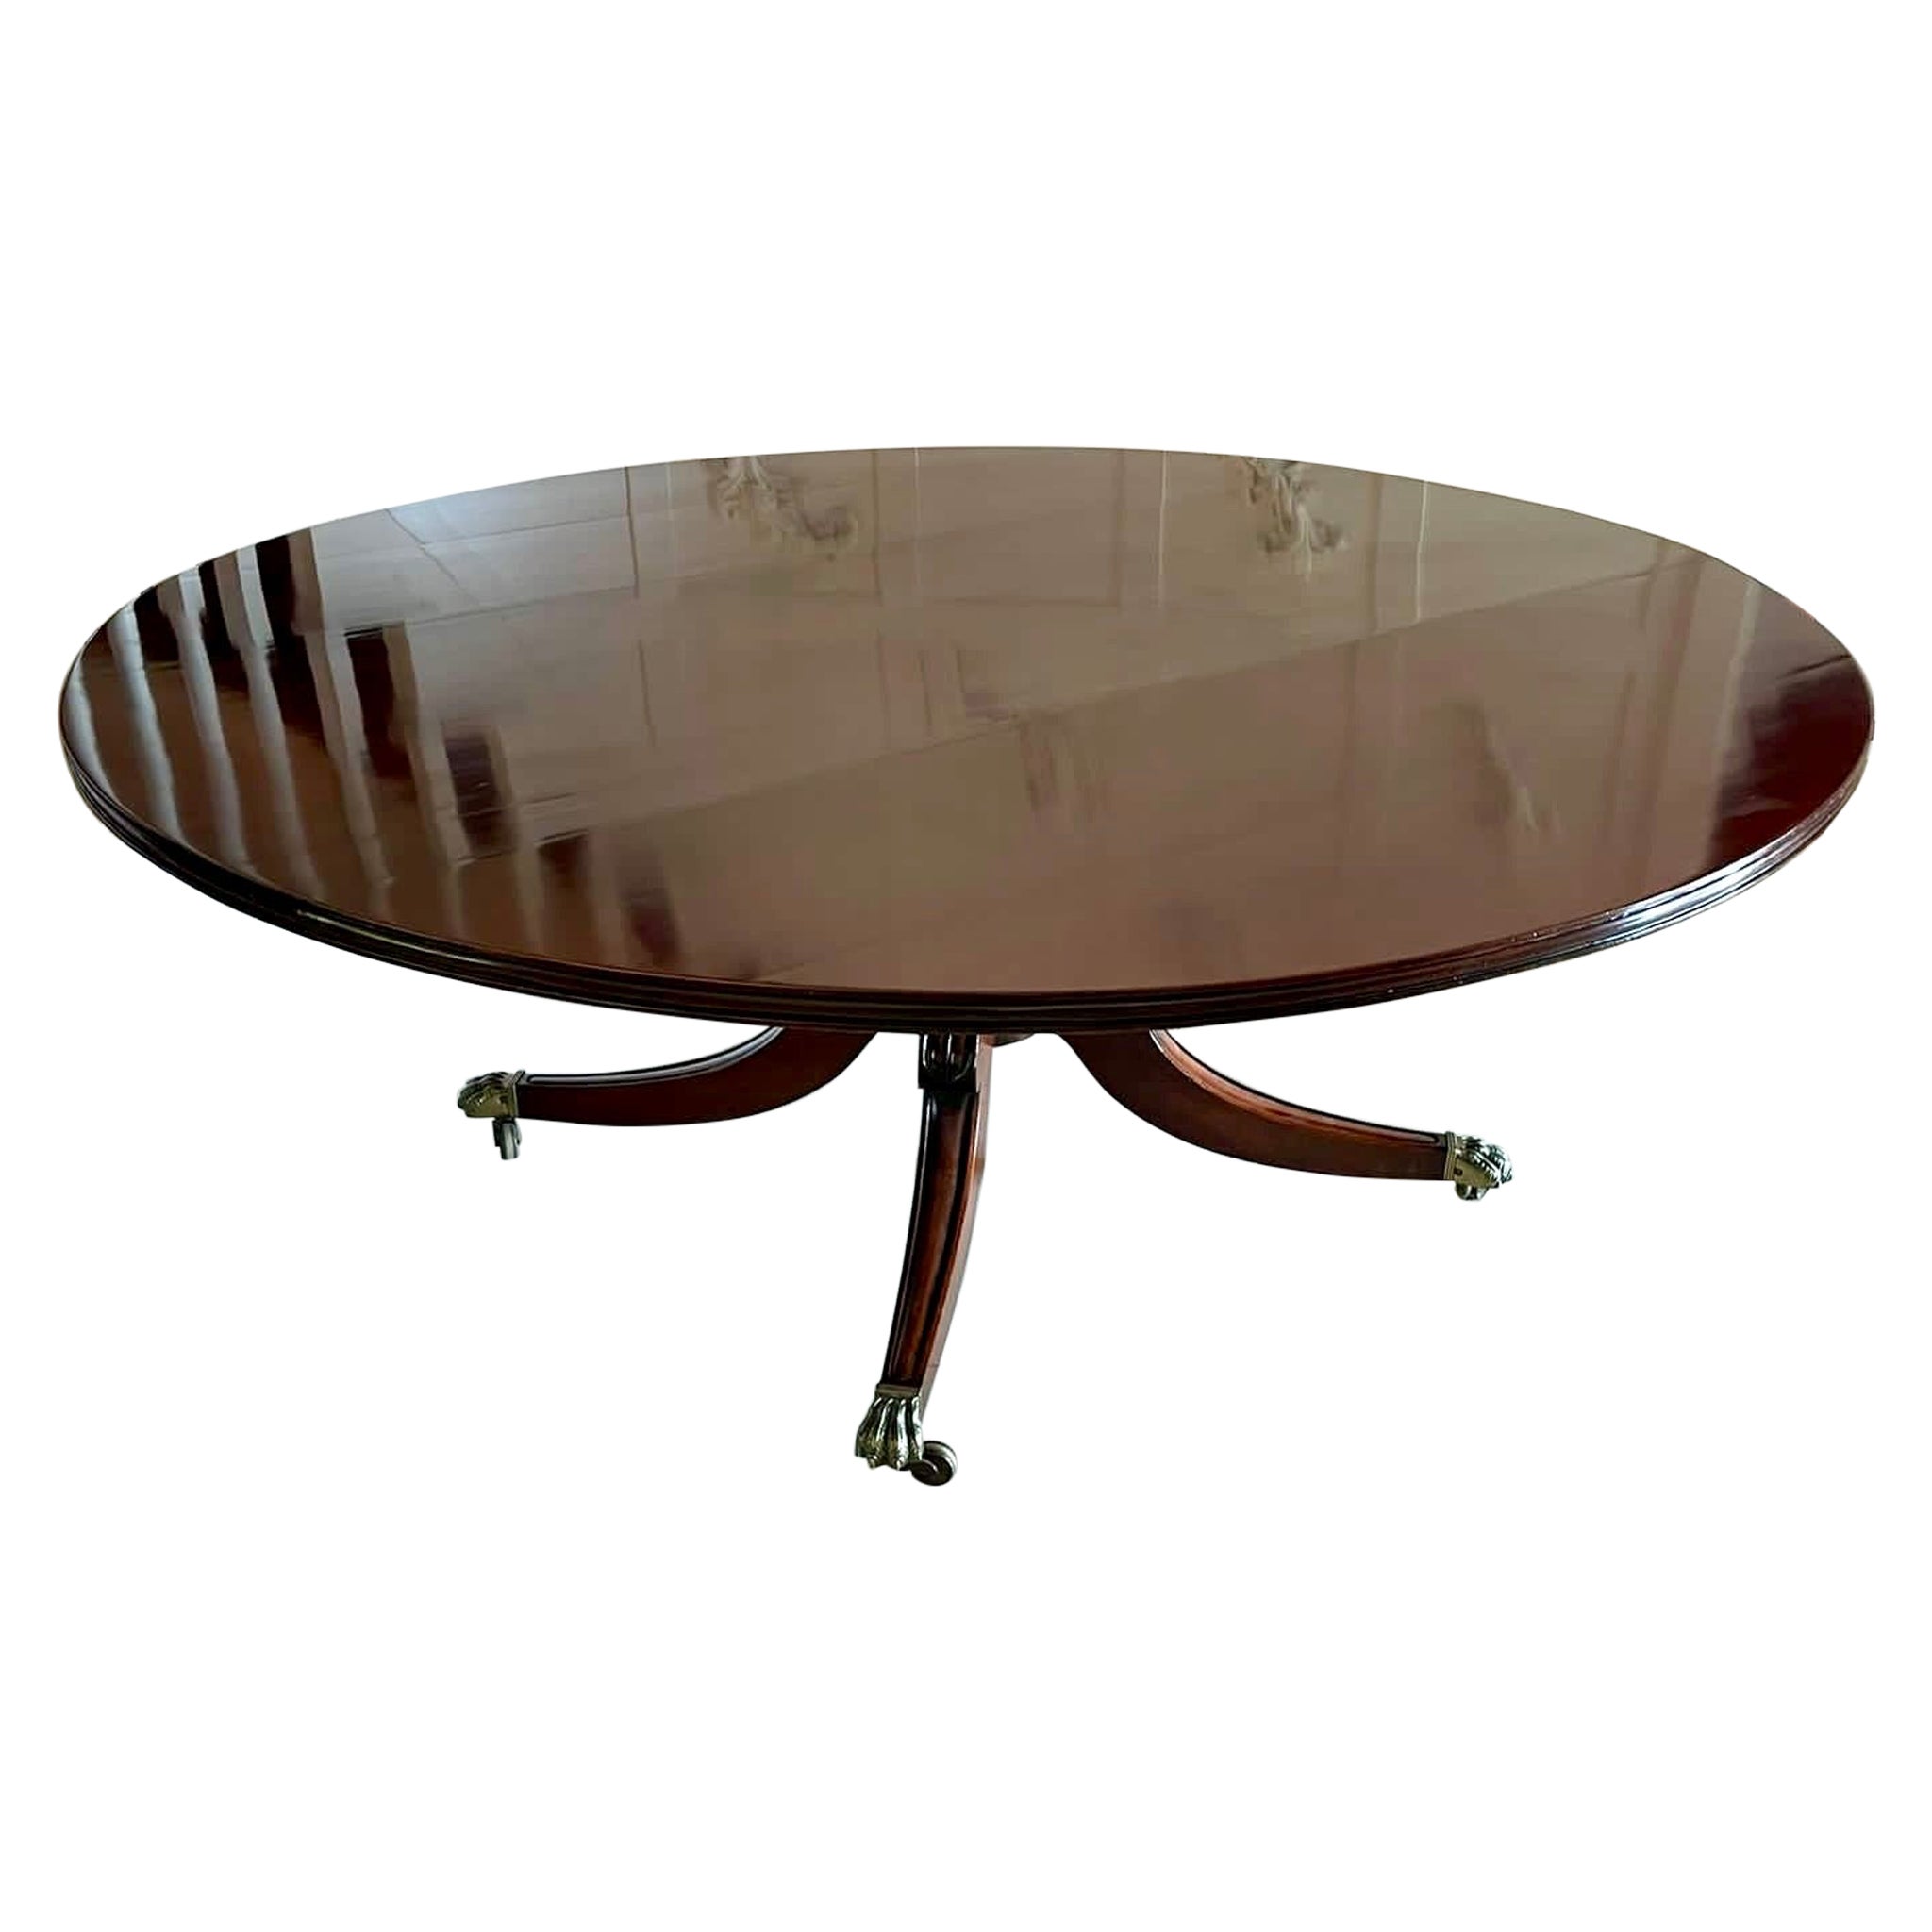 Outstanding Quality Large 10 Seater Antique Quality Mahogany Round Dining Table For Sale